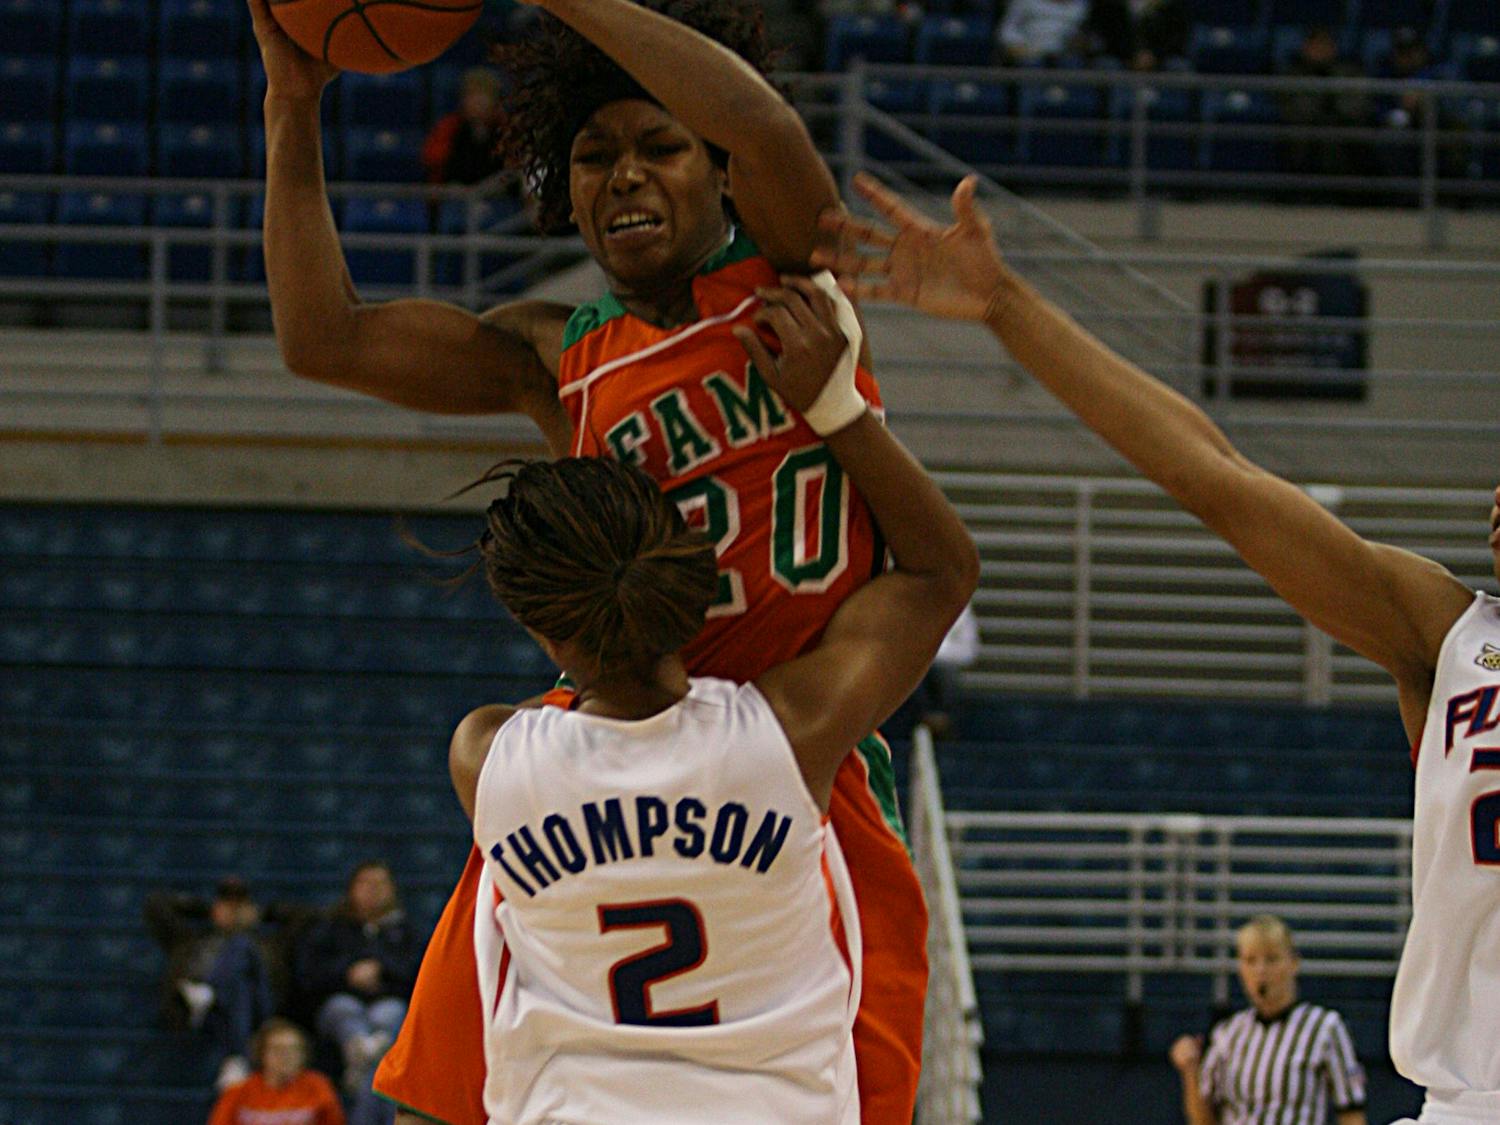 Lonnika Thompson blocks a shot during the Gators' 71-51 win against Florida A&M University on Jan. 2 at the O'Connell Center. (Jeremiah Stanley / Alligator)